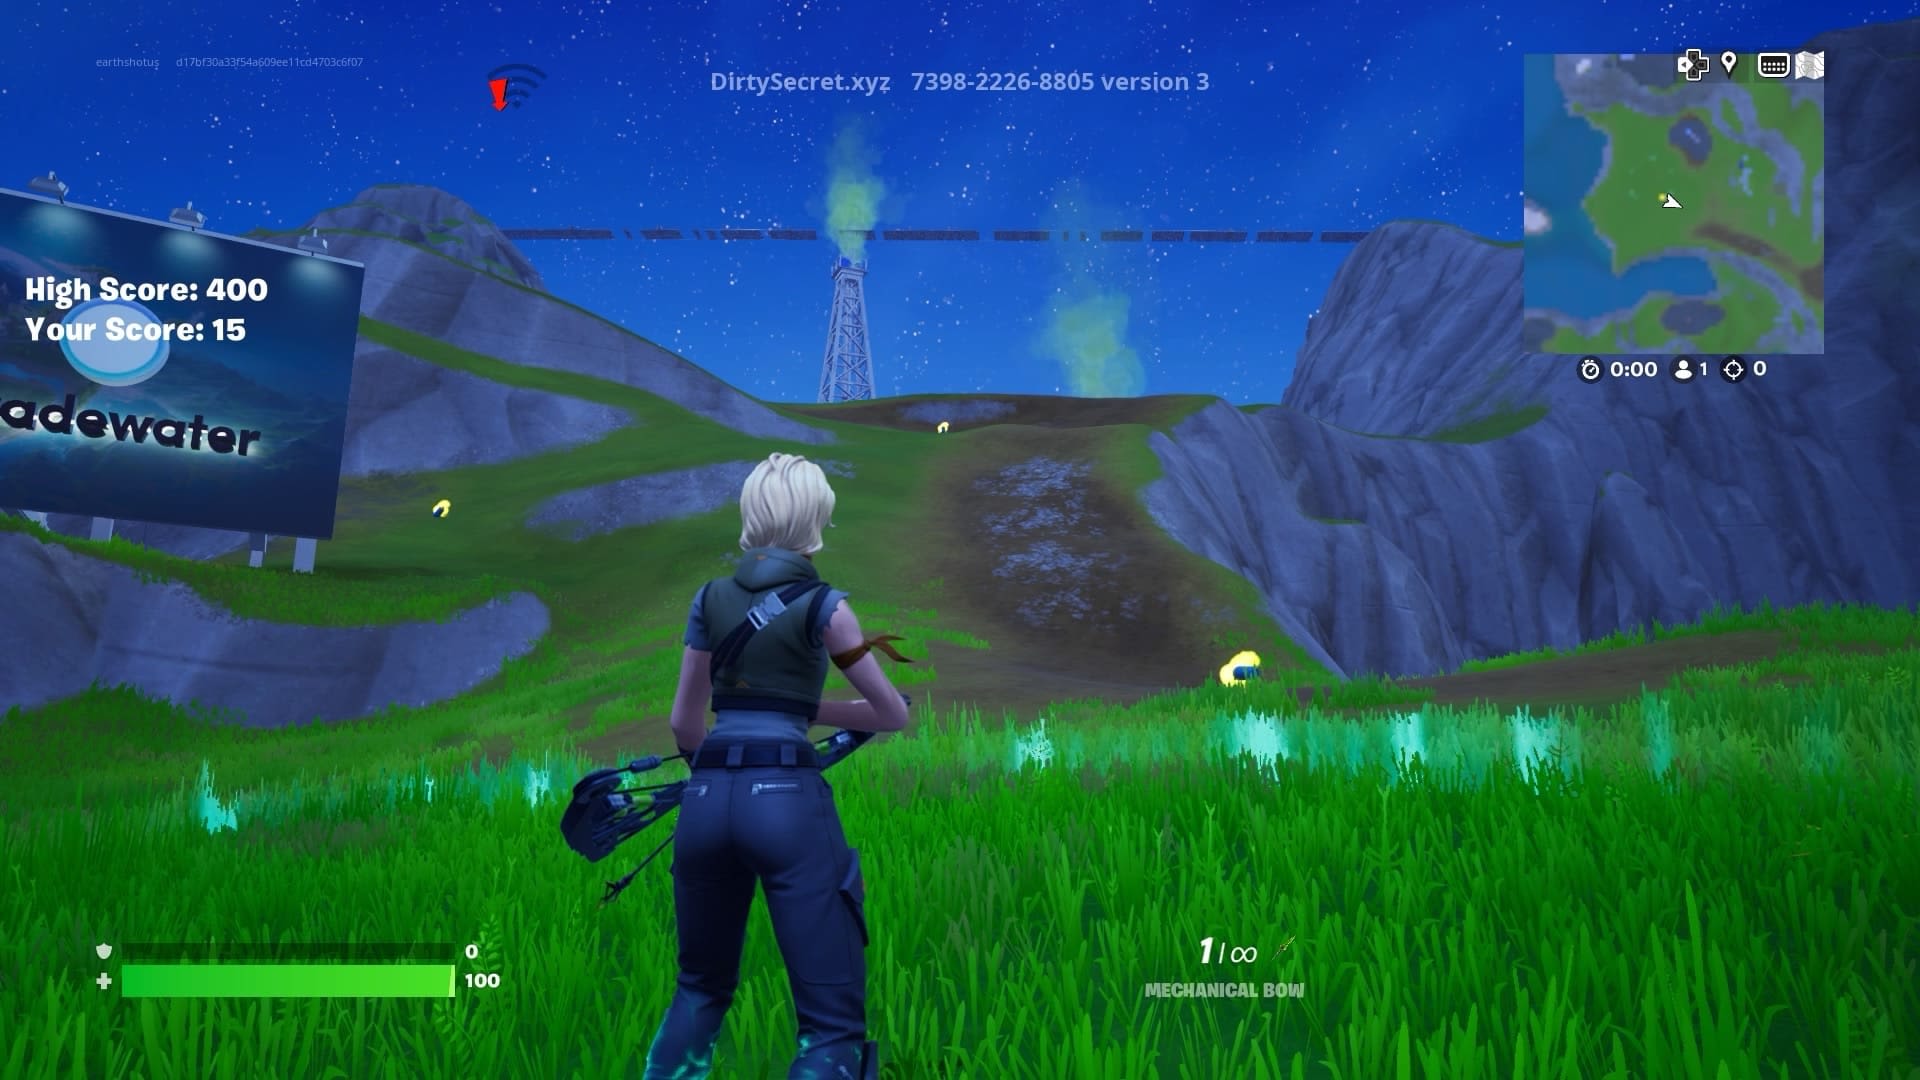 Column: This 'Fortnite' island is the latest climate change battleground